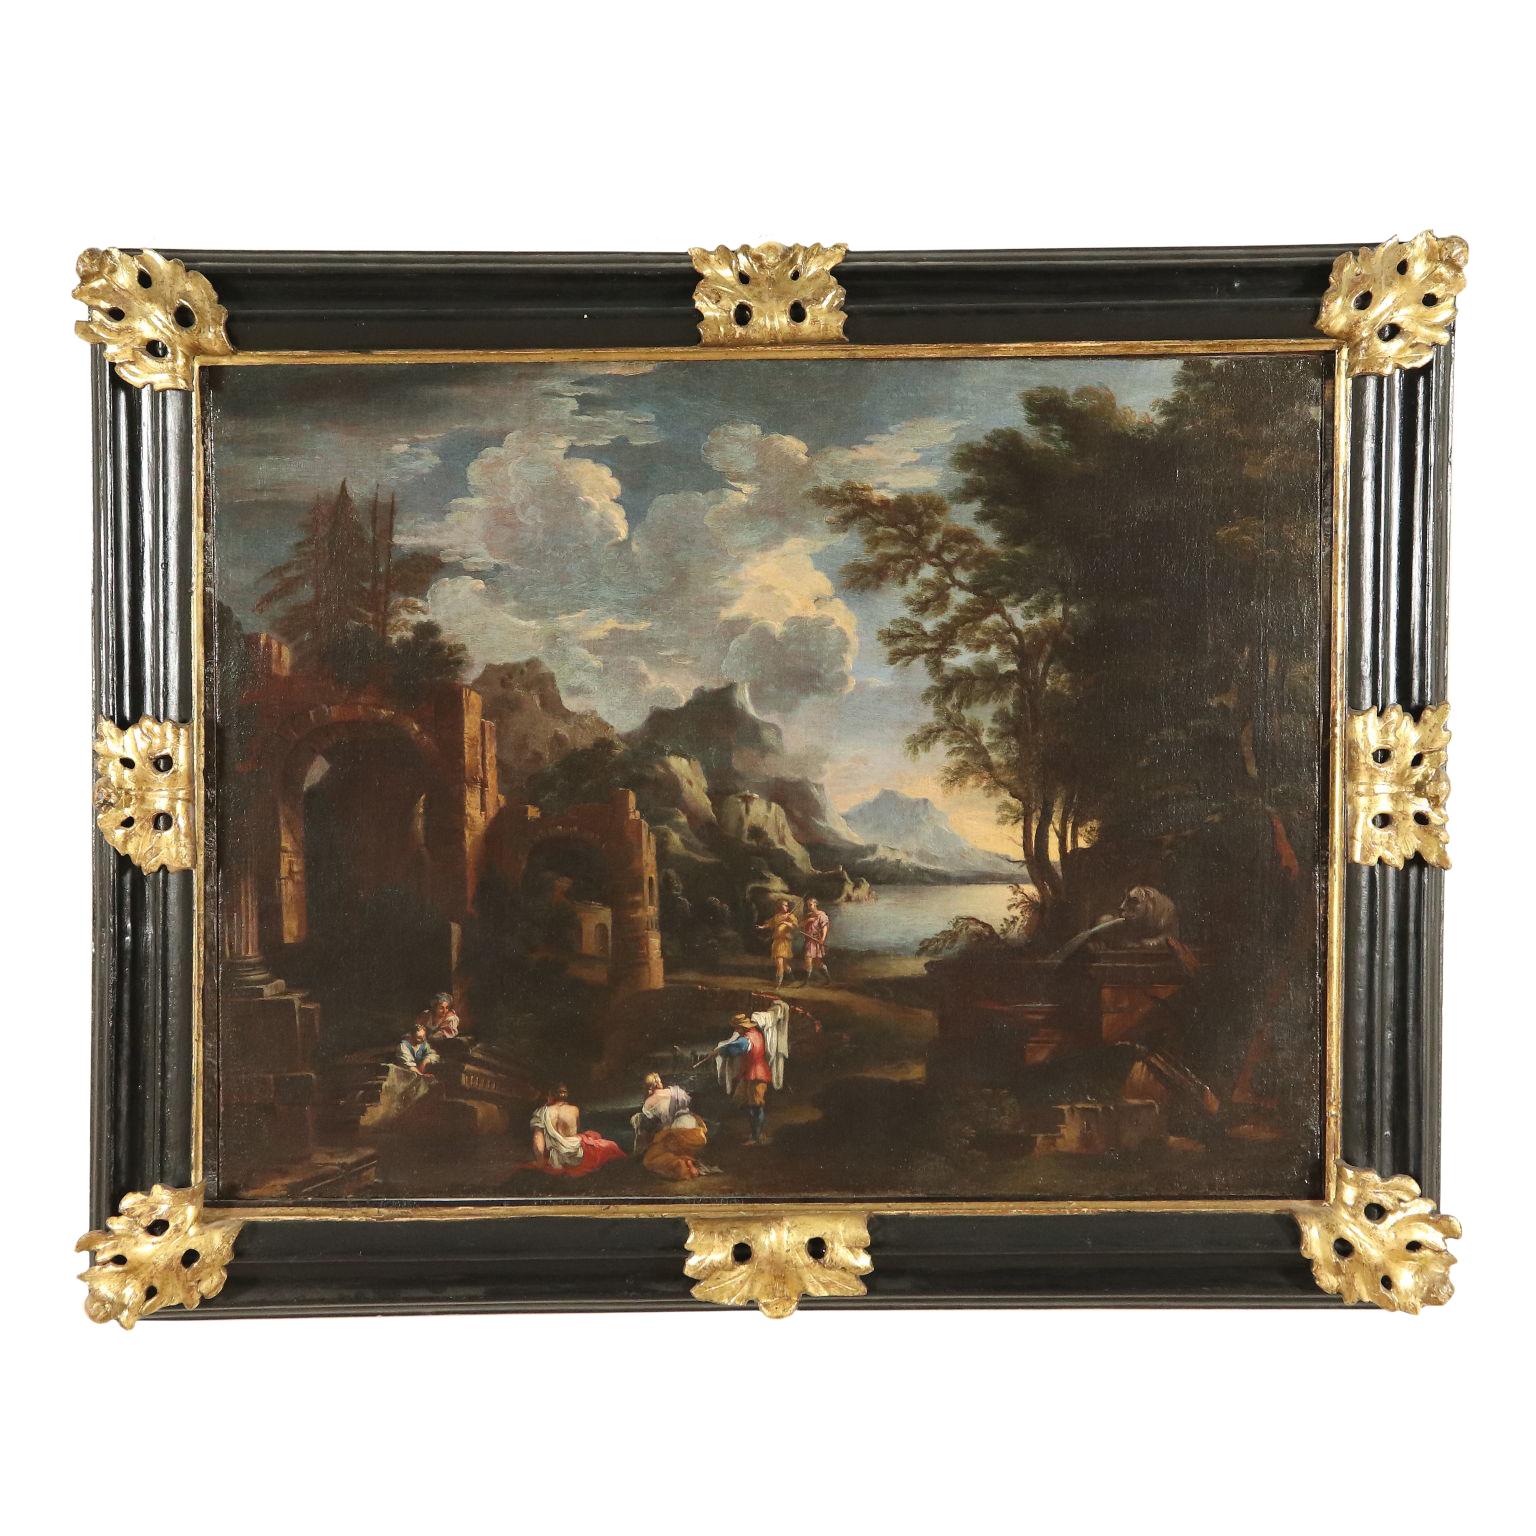 Unknown Landscape Painting - Landscape with Ruins and Figures Oil on Board 18th Century